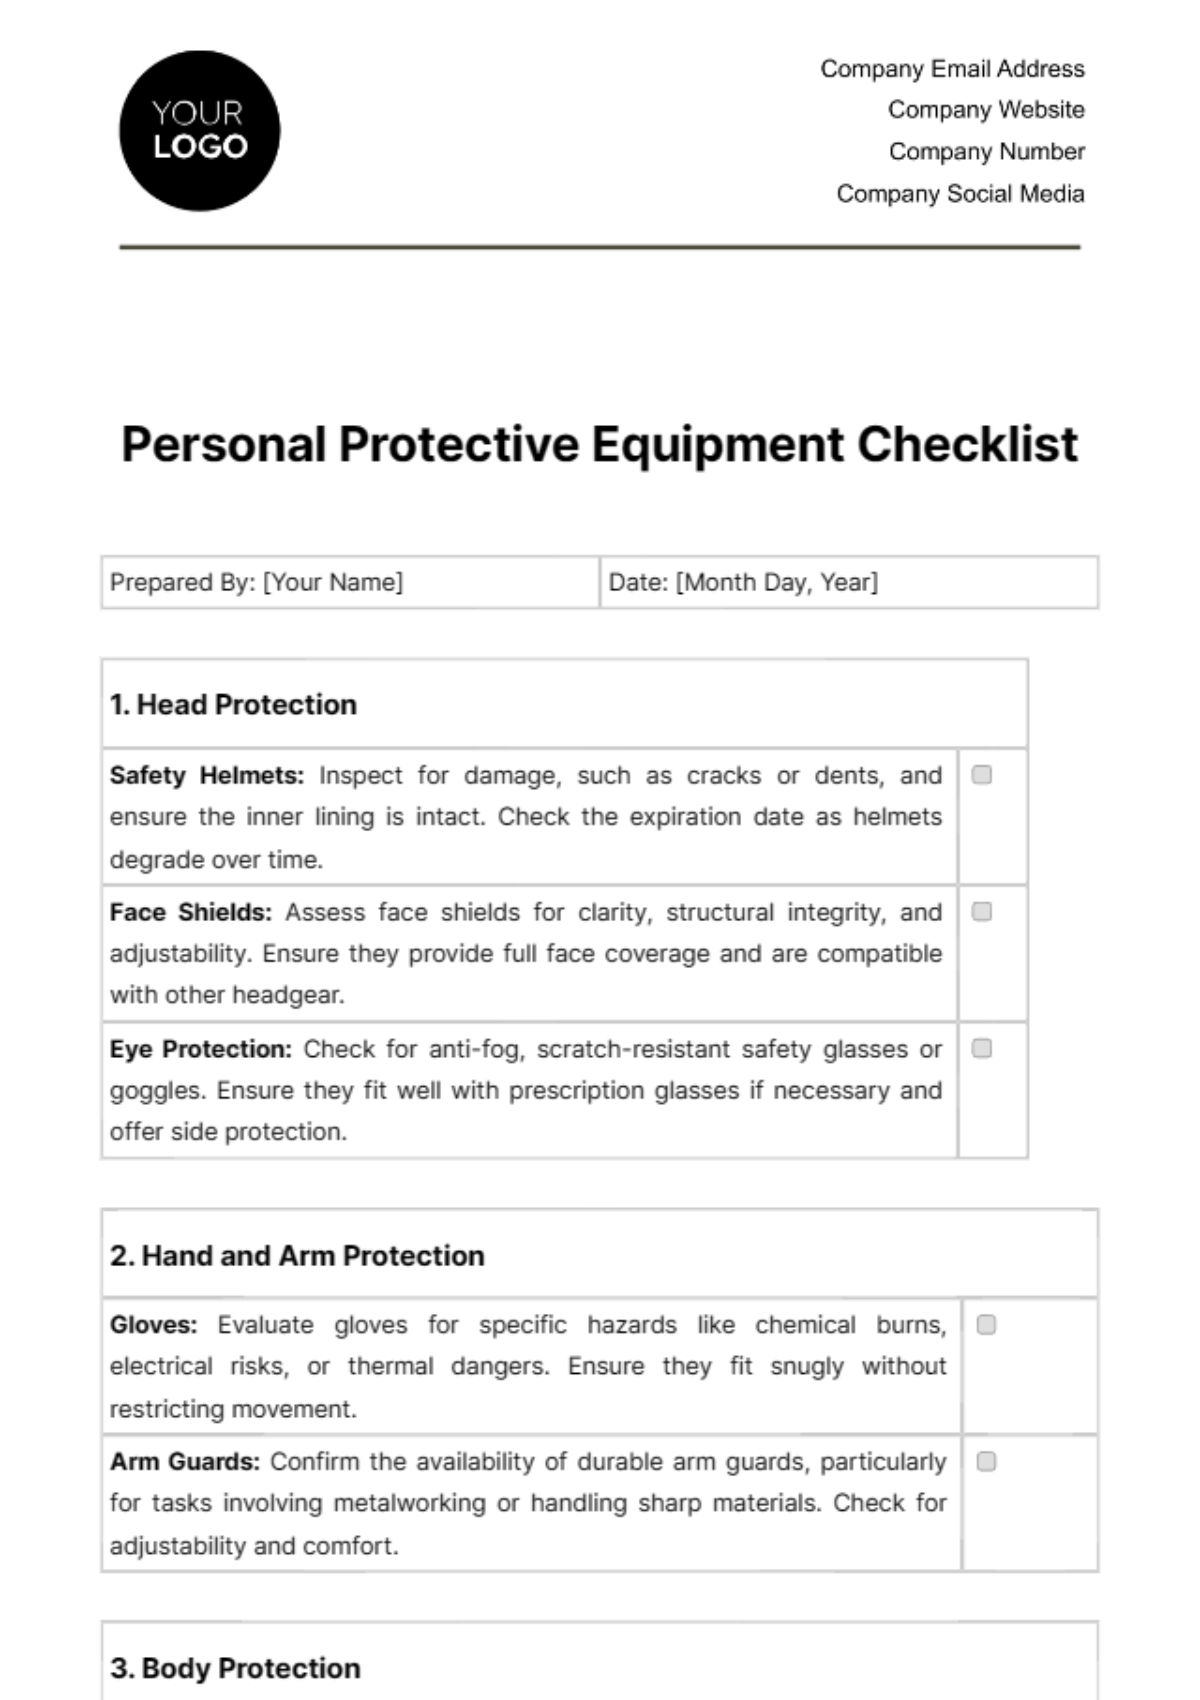 Personal Protective Equipment Checklist Template